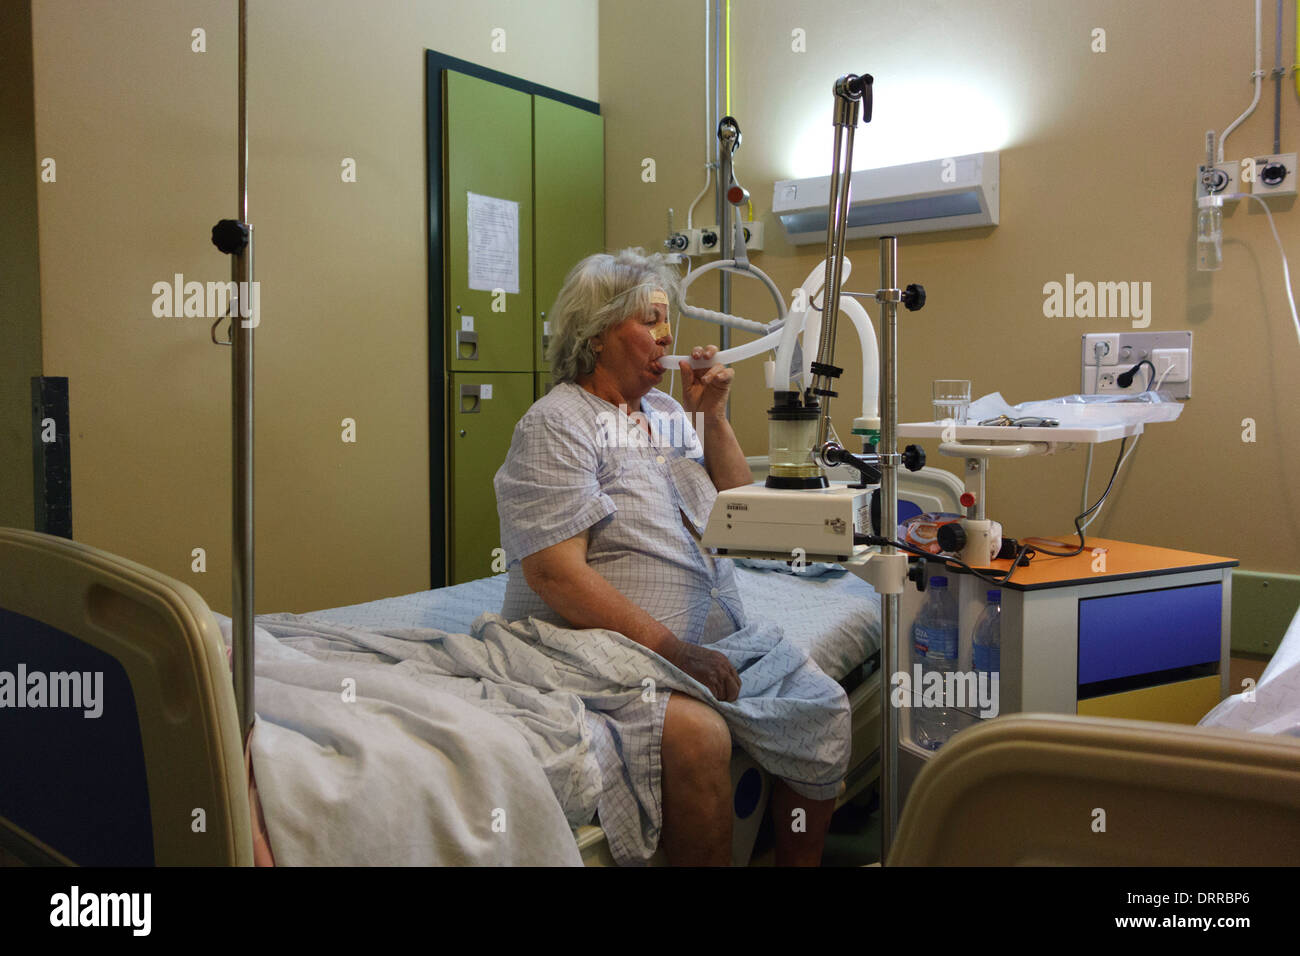 Patient using automatic mucus suction pump while sitting in a hospital bed Stock Photo